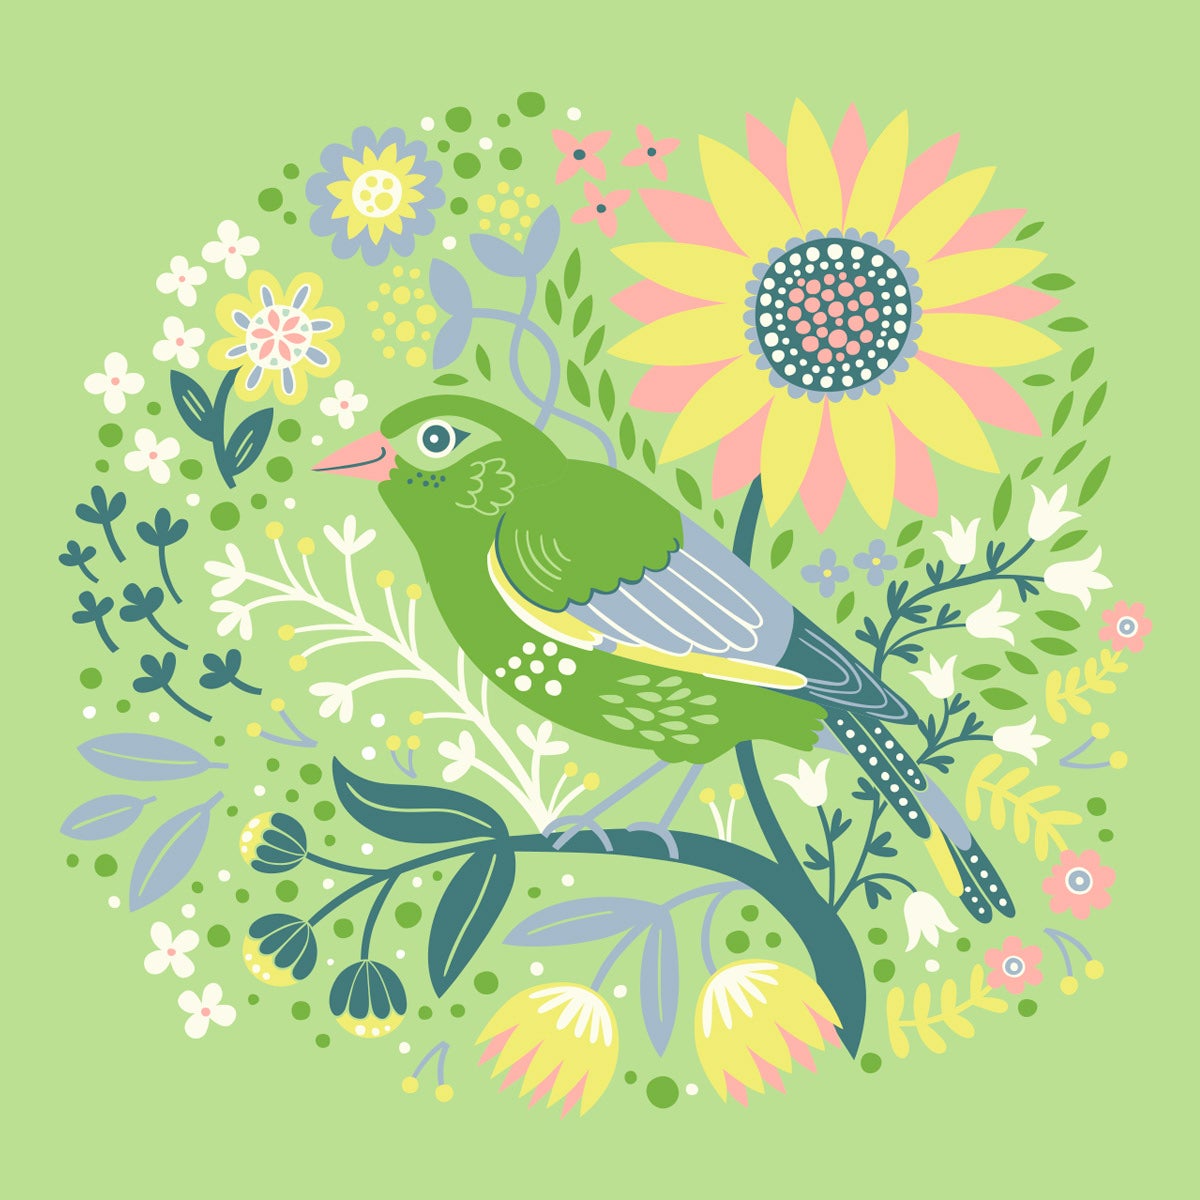 Greenfinch Tipperary Birdy Cushion  New to the Tipperary Crystal Birdy Collection, this plush, feather filled 45cm velvet cushion features the exquisite Robin illustration and will make a bright and colourful statement in any home.